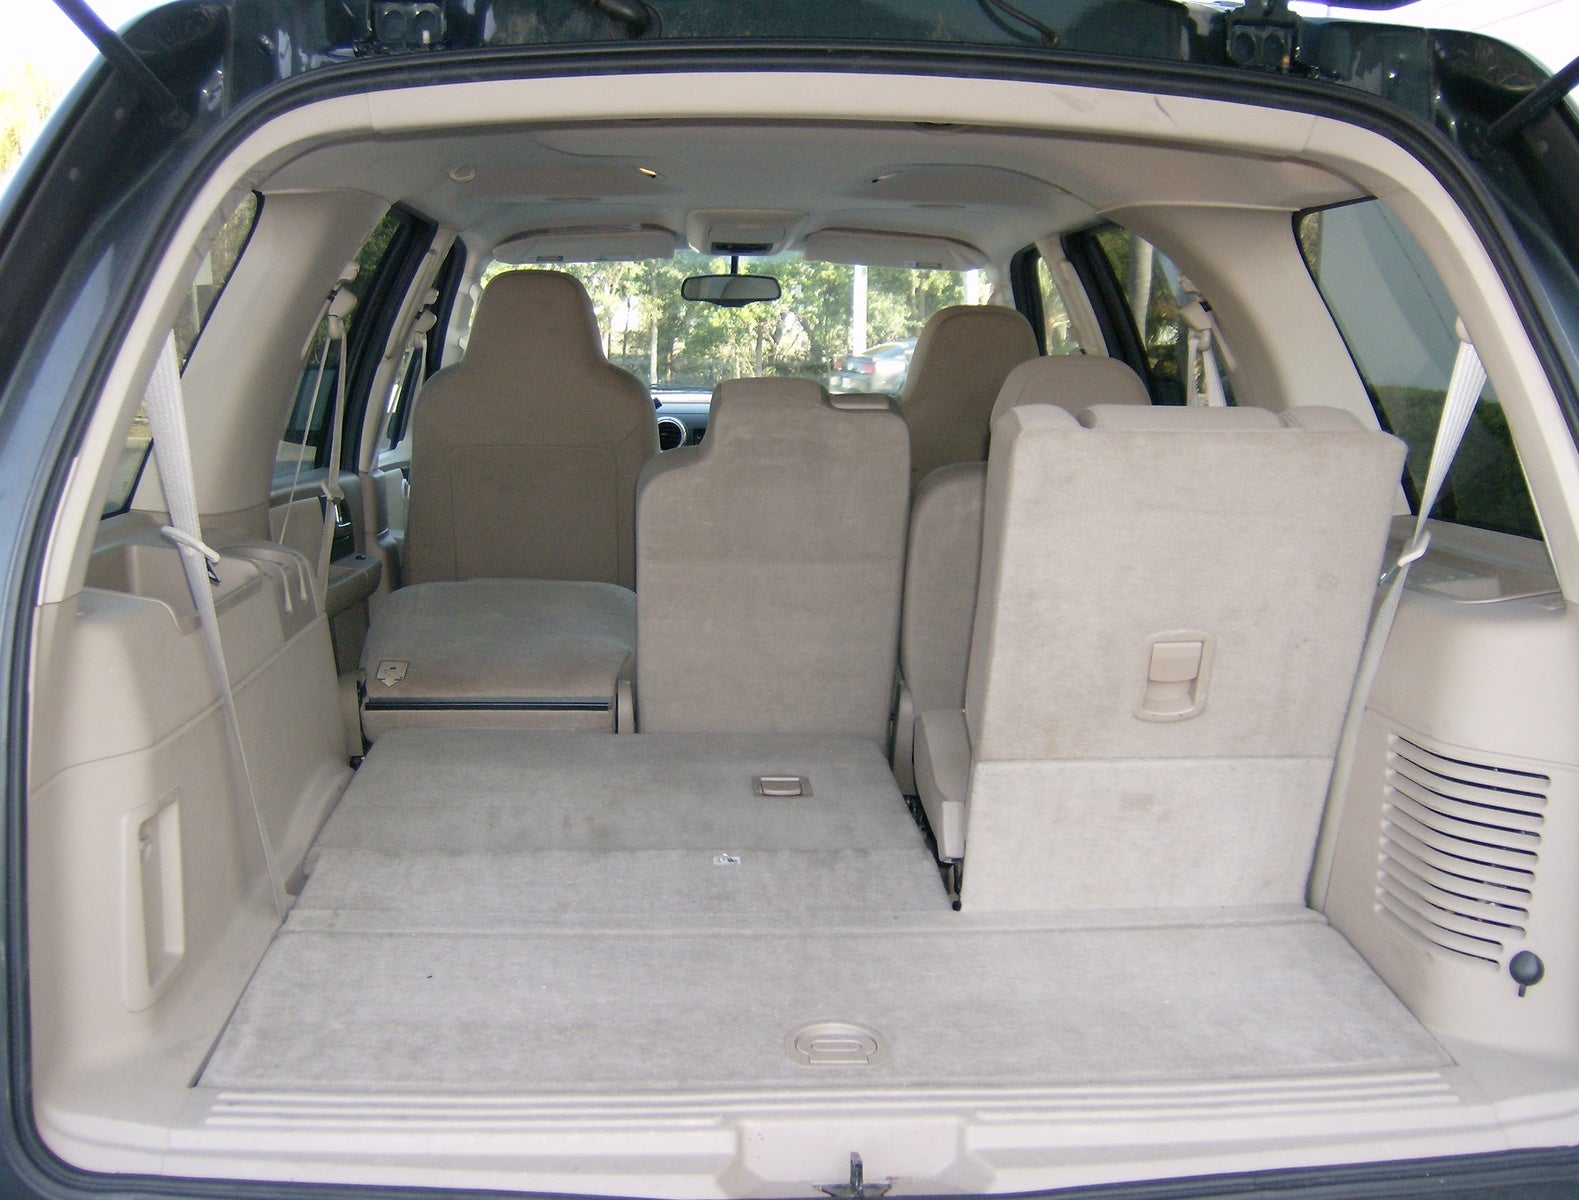 Interior dimensions of ford expedition #8